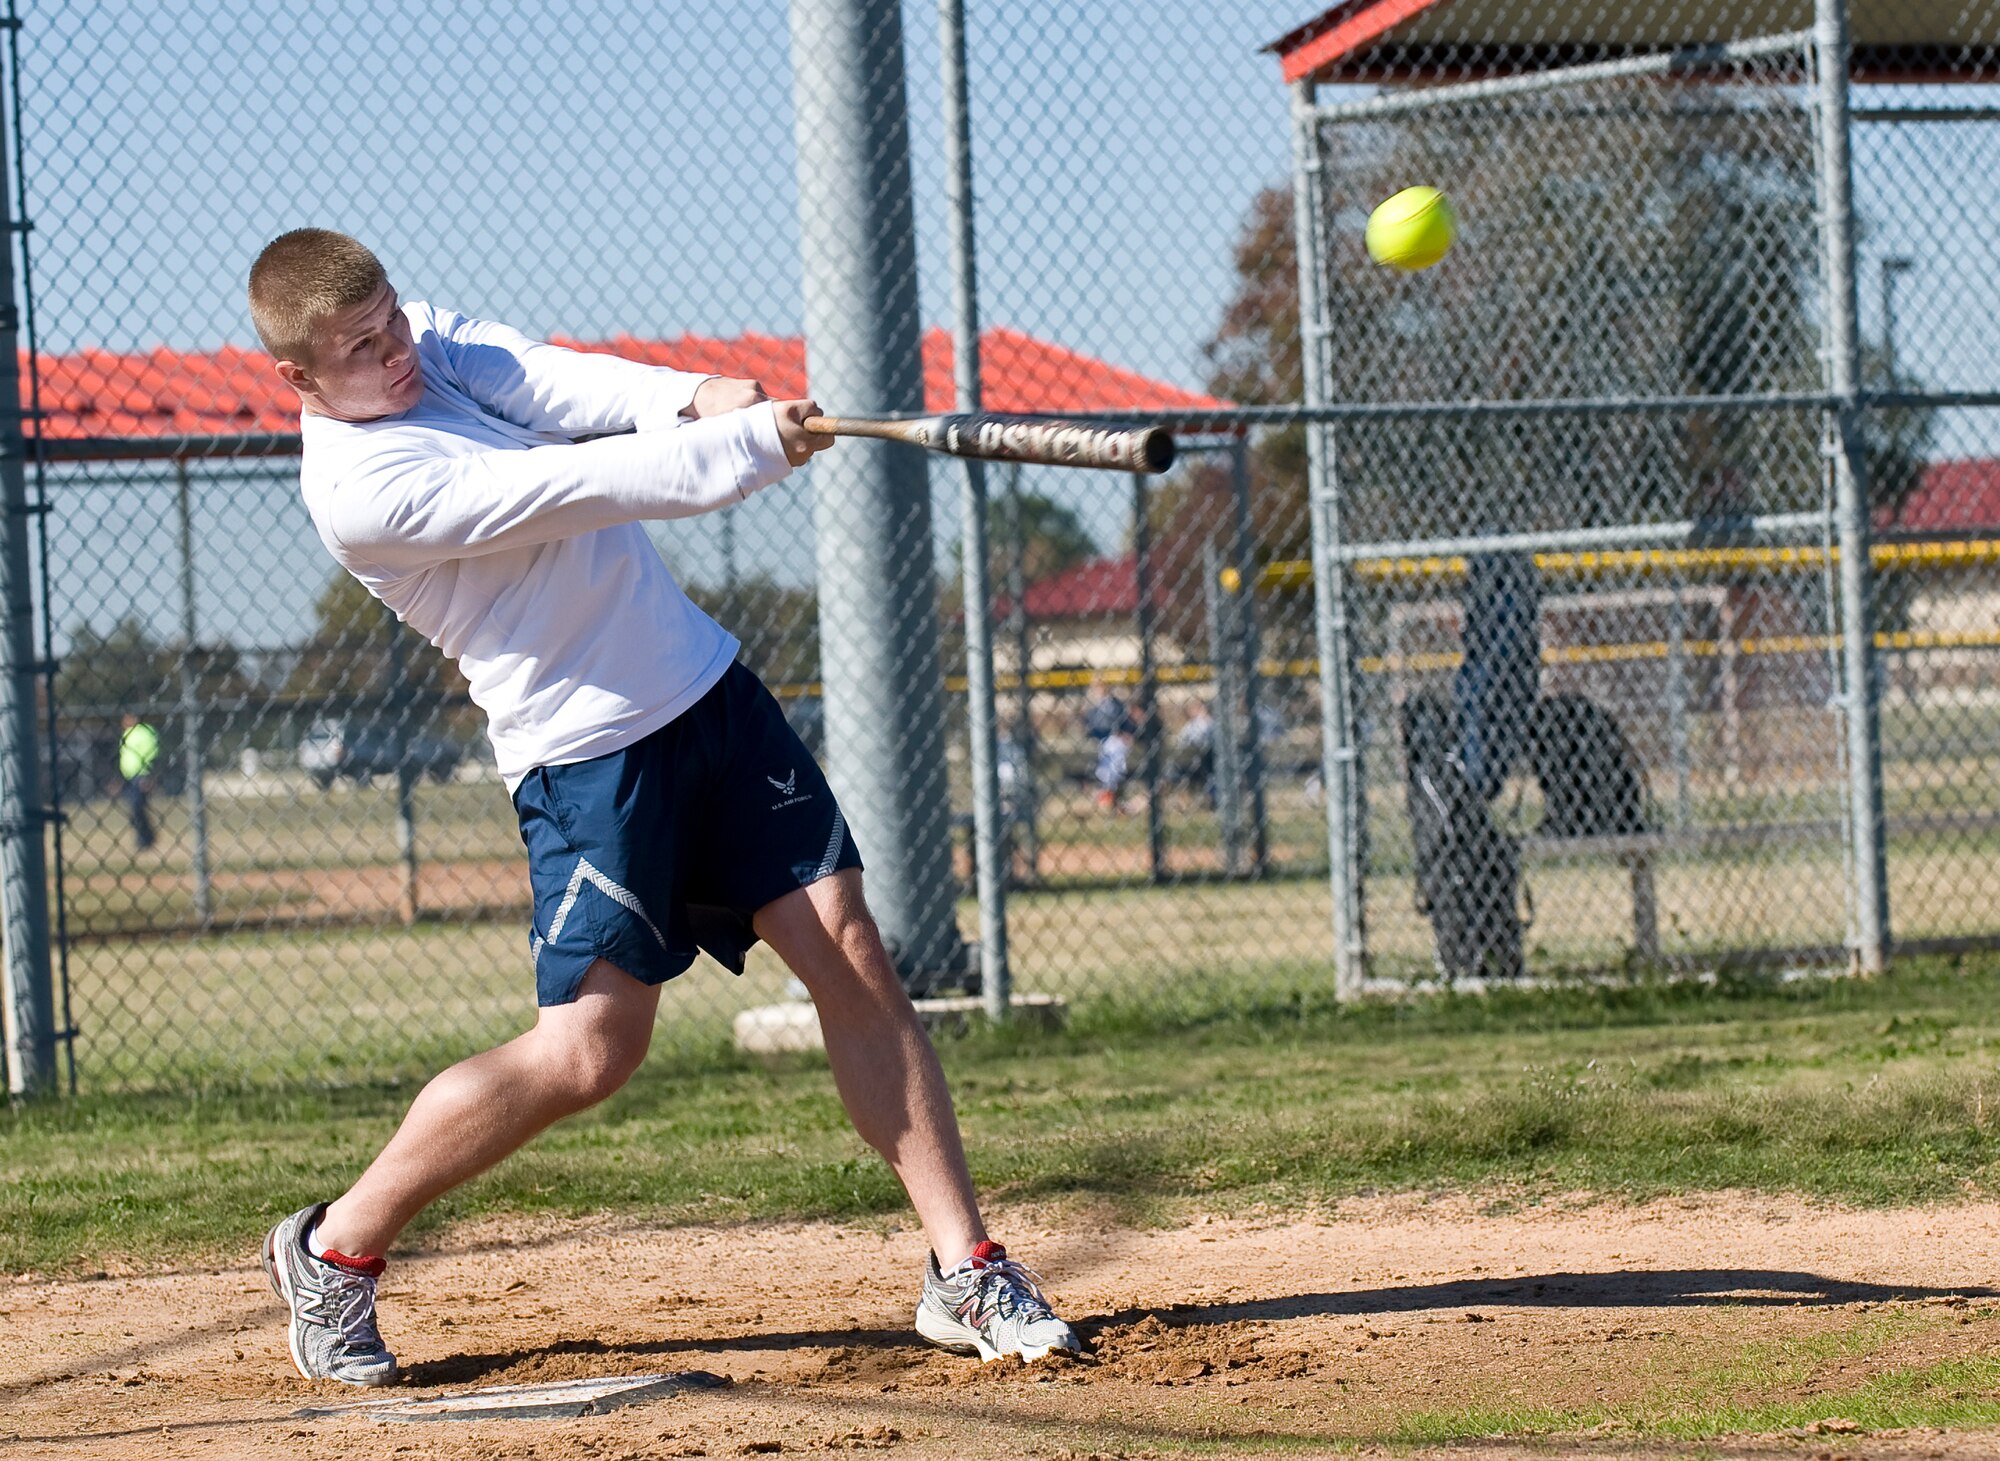 Airman 1st Class Kristopher Tolar, 2nd Contracting Squadron, hits a ball during the homerun derby on Barksdale Air Force Base, La., Nov. 16. The derby was part of the 2012 Sports Day, an annual event that gives Airmen the opportunity to participate in several individual and team sports throughout the day. (U.S. Air Force photo/Staff Sgt. Chad Warren)(RELEASED)